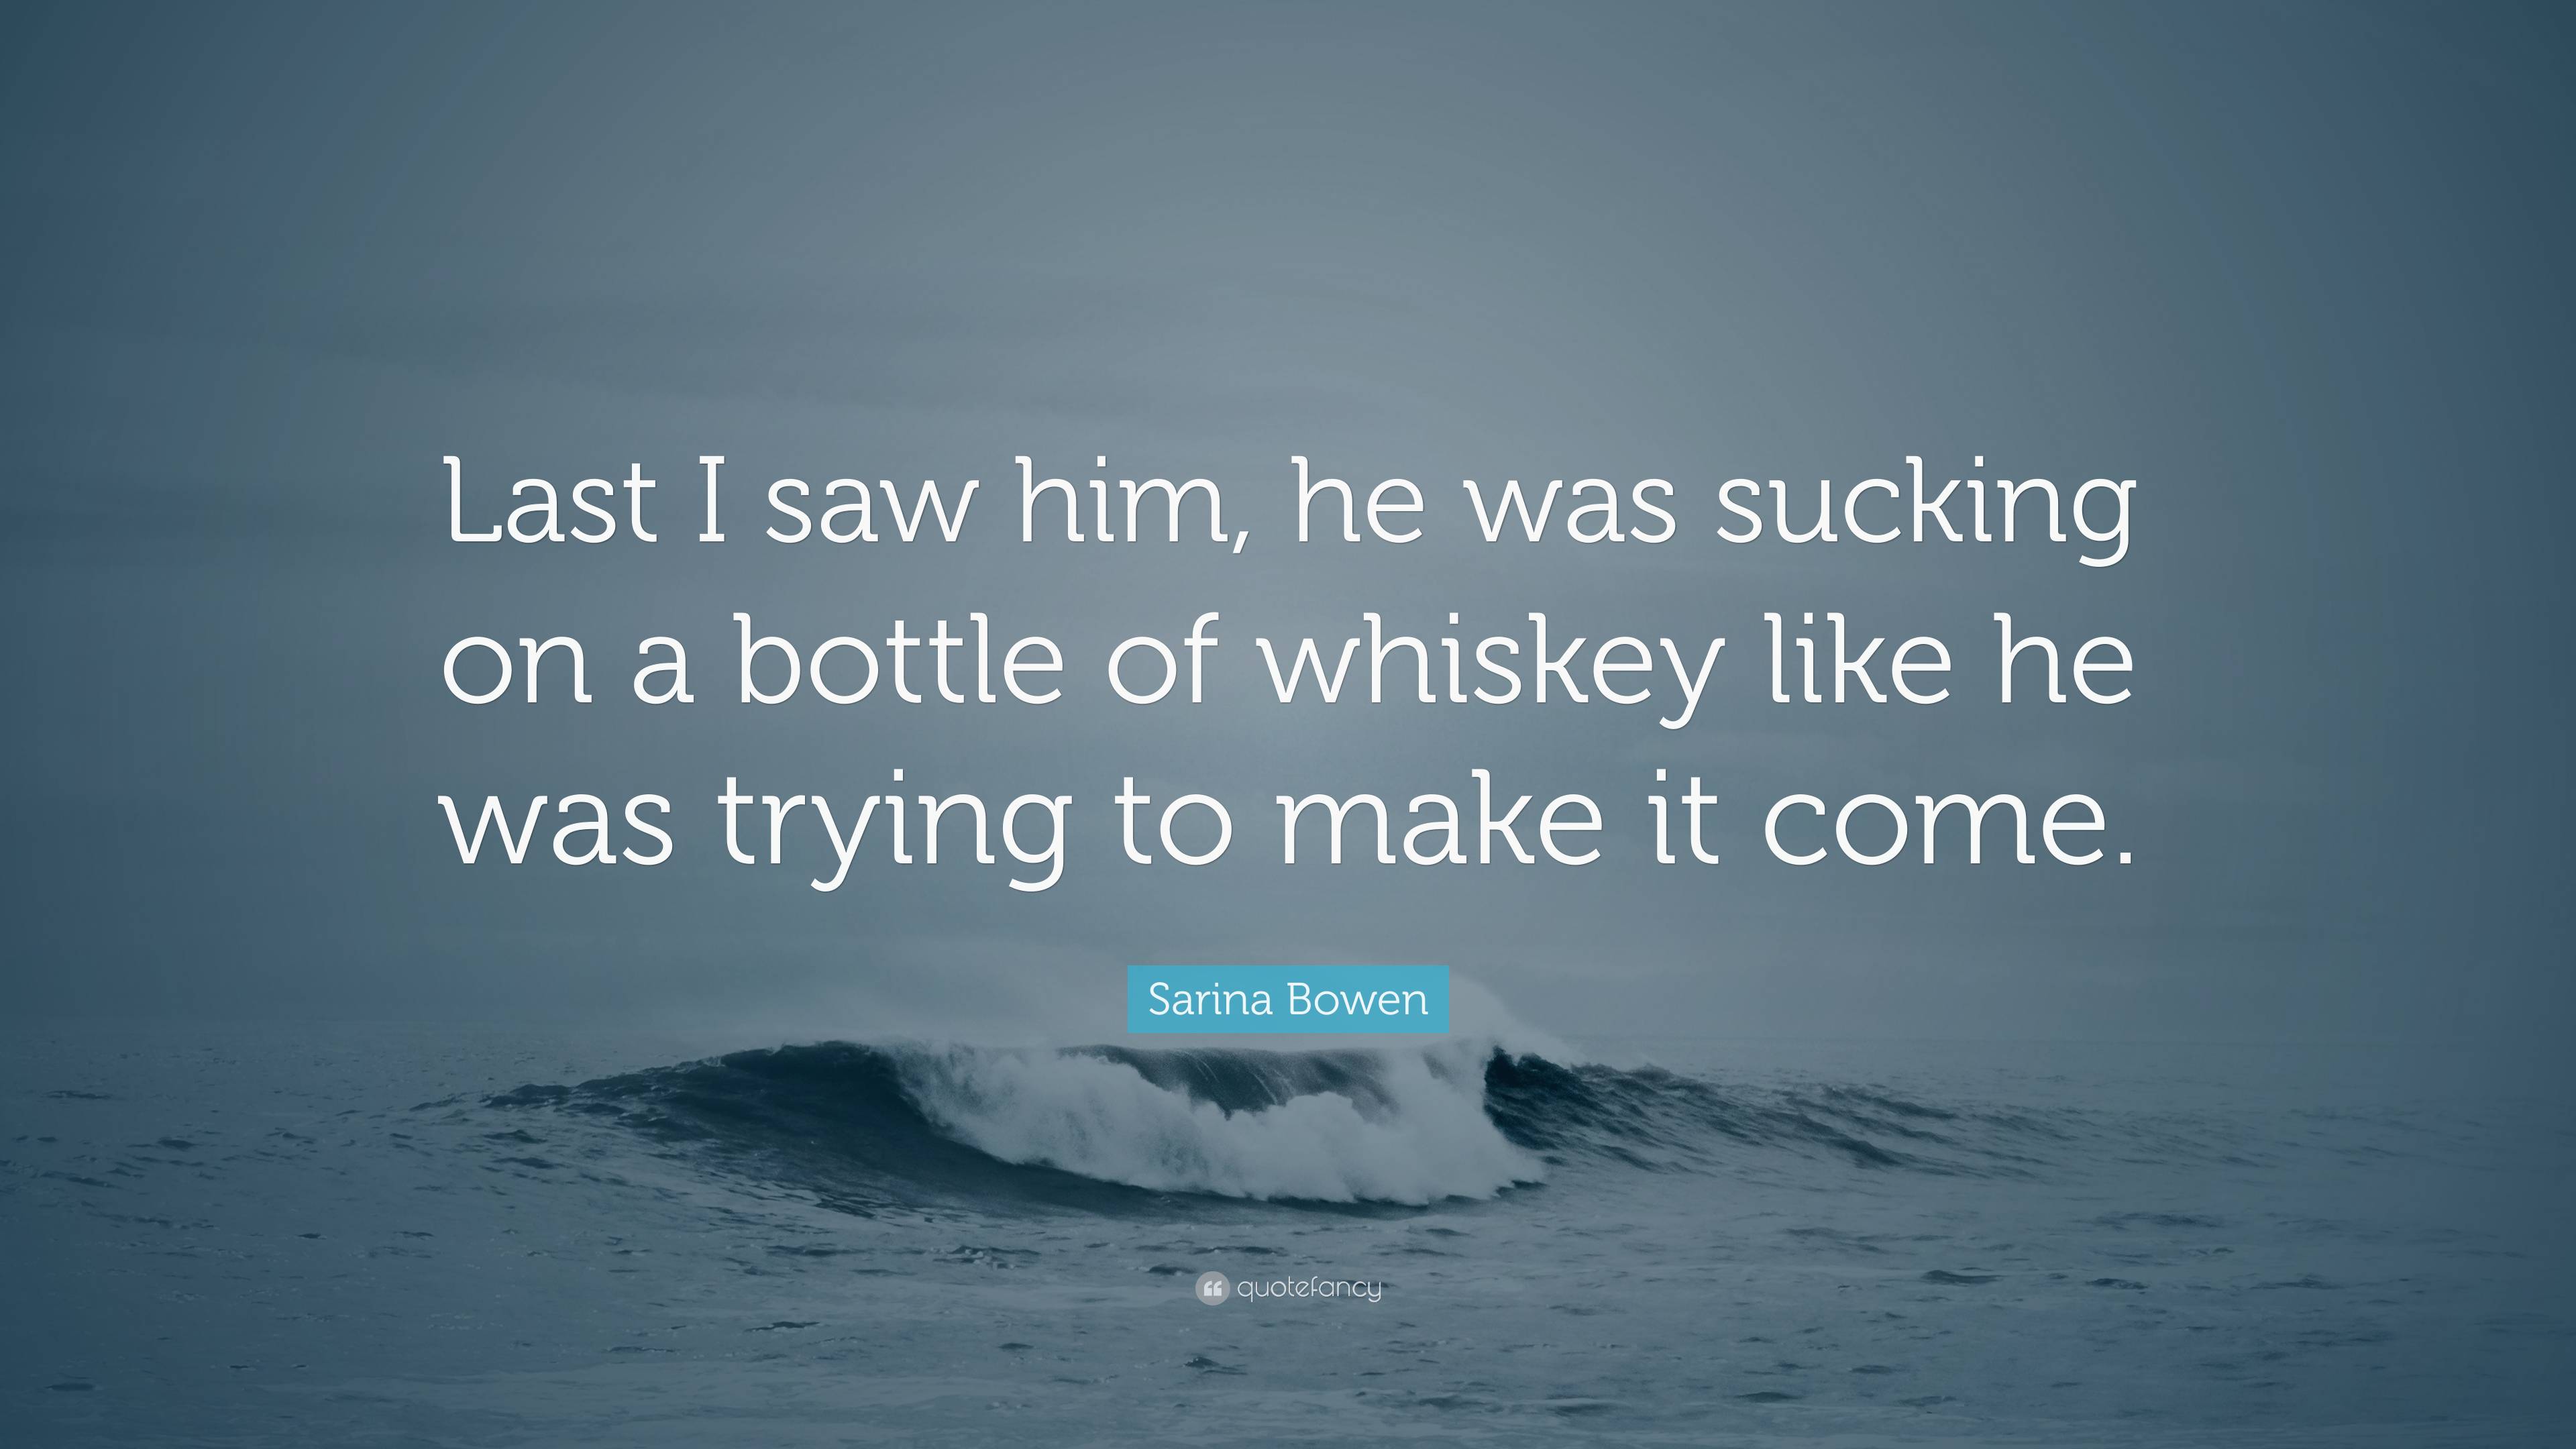 Sarina Bowen Quote: “Last I saw him, he was sucking on a bottle of ...